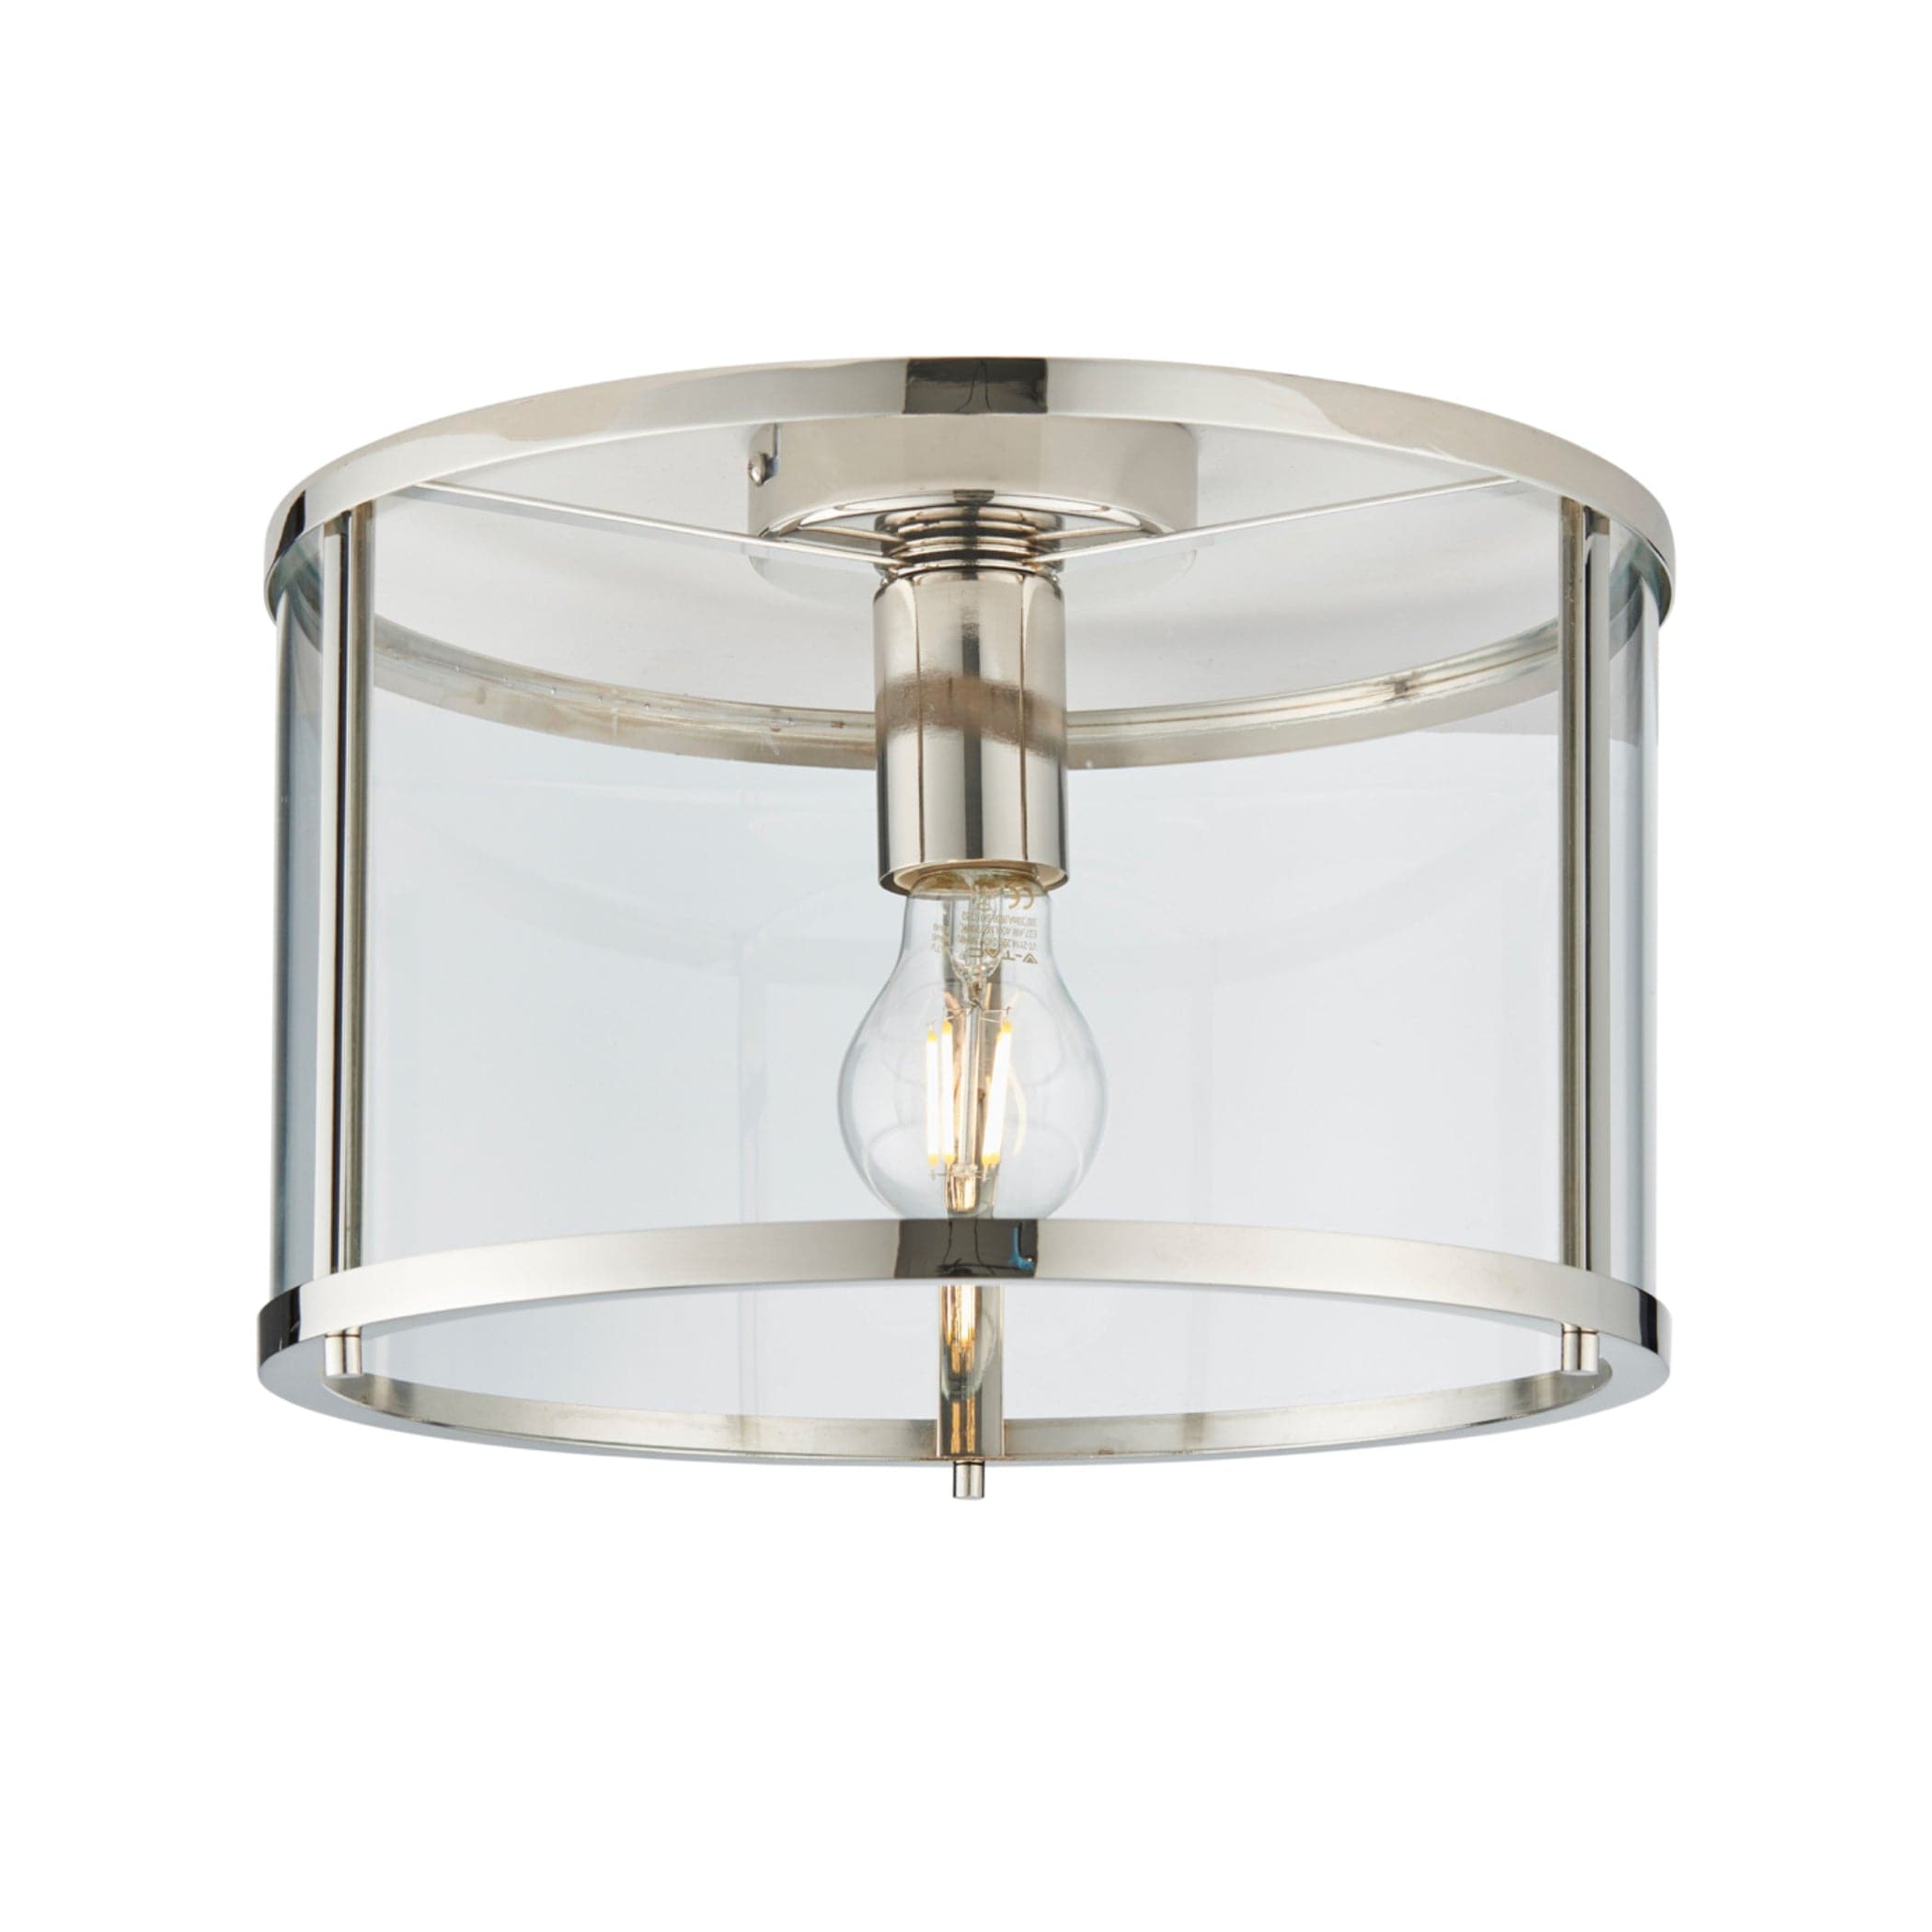 Round Nickel and Glass Ceiling Light 2